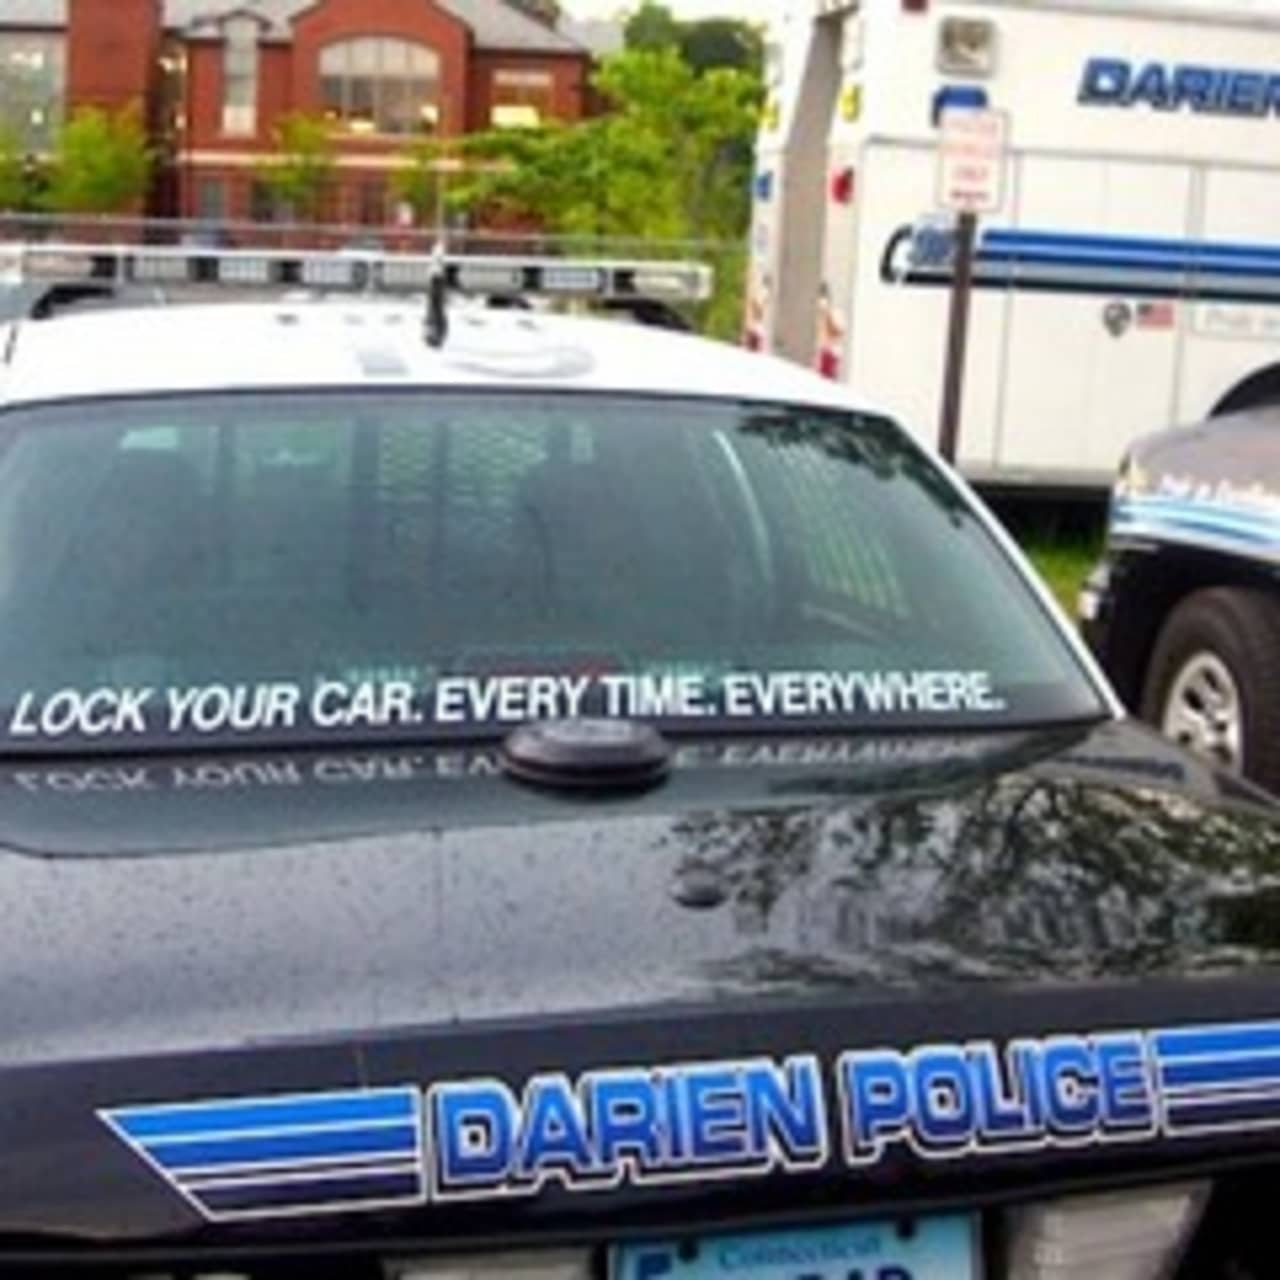 Darien police said an accident involving a cement truck knocked down power lines Wednesday afternoon.